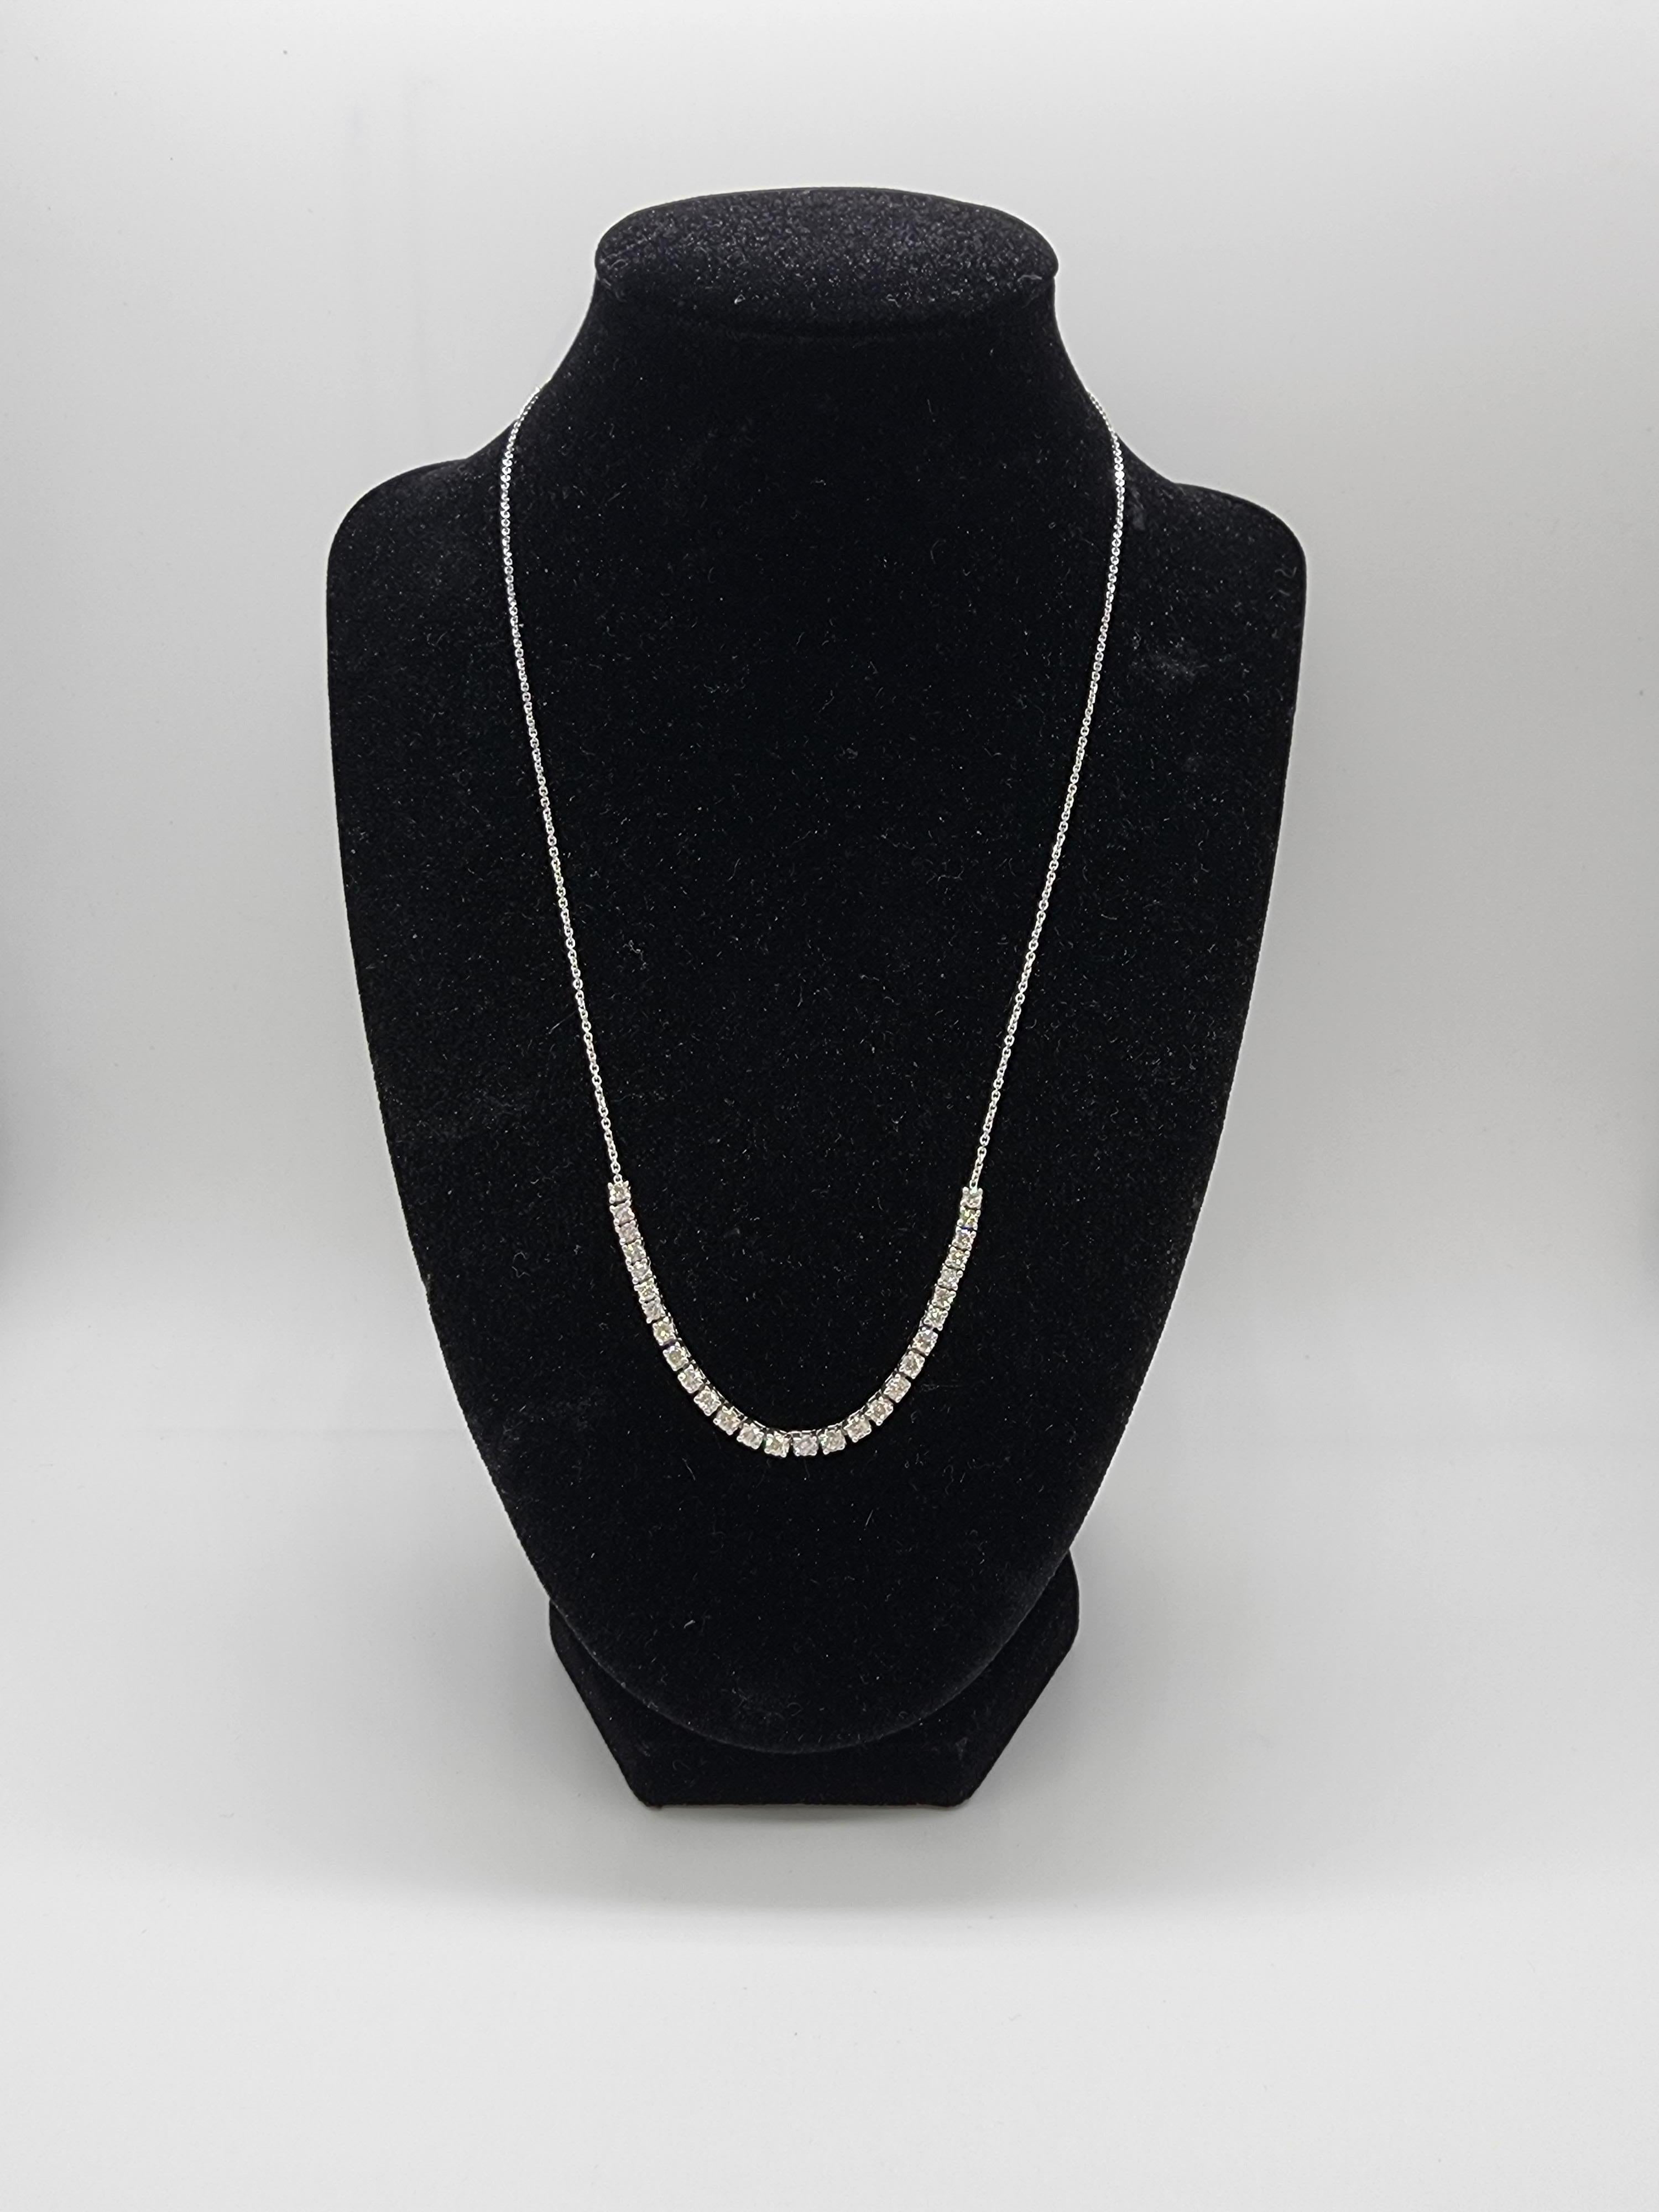 2.25 Cttw Diamond Tennis Necklace 14 Karat White Gold. Diamond link 3.25 inch,  
Length 18 inch, adjustable to 16 inch with the extra loop. Average Color I, Clarity SI. natural diamonds. 